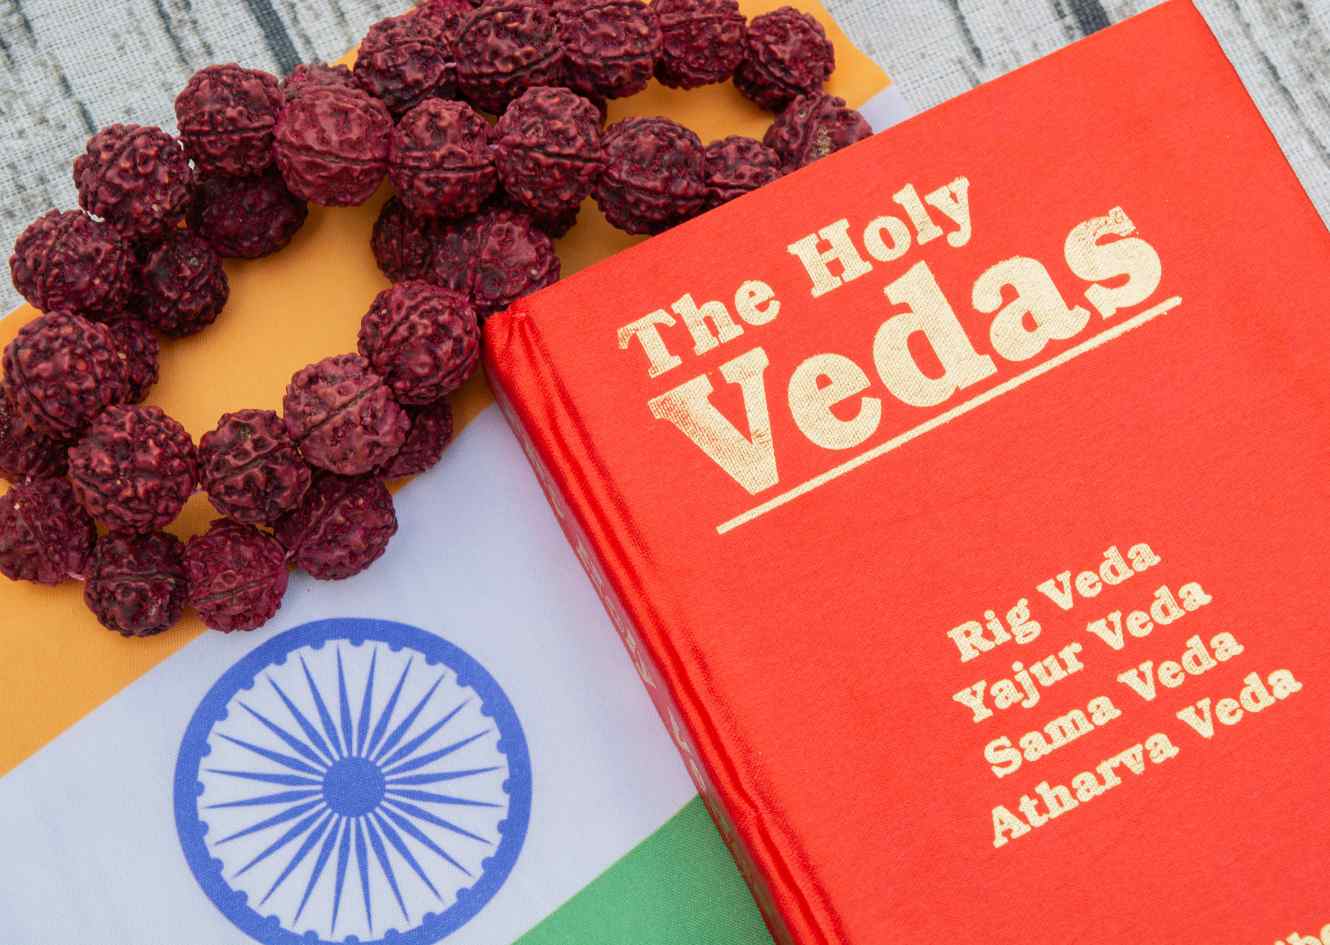 The Vedas, Veda, Ved